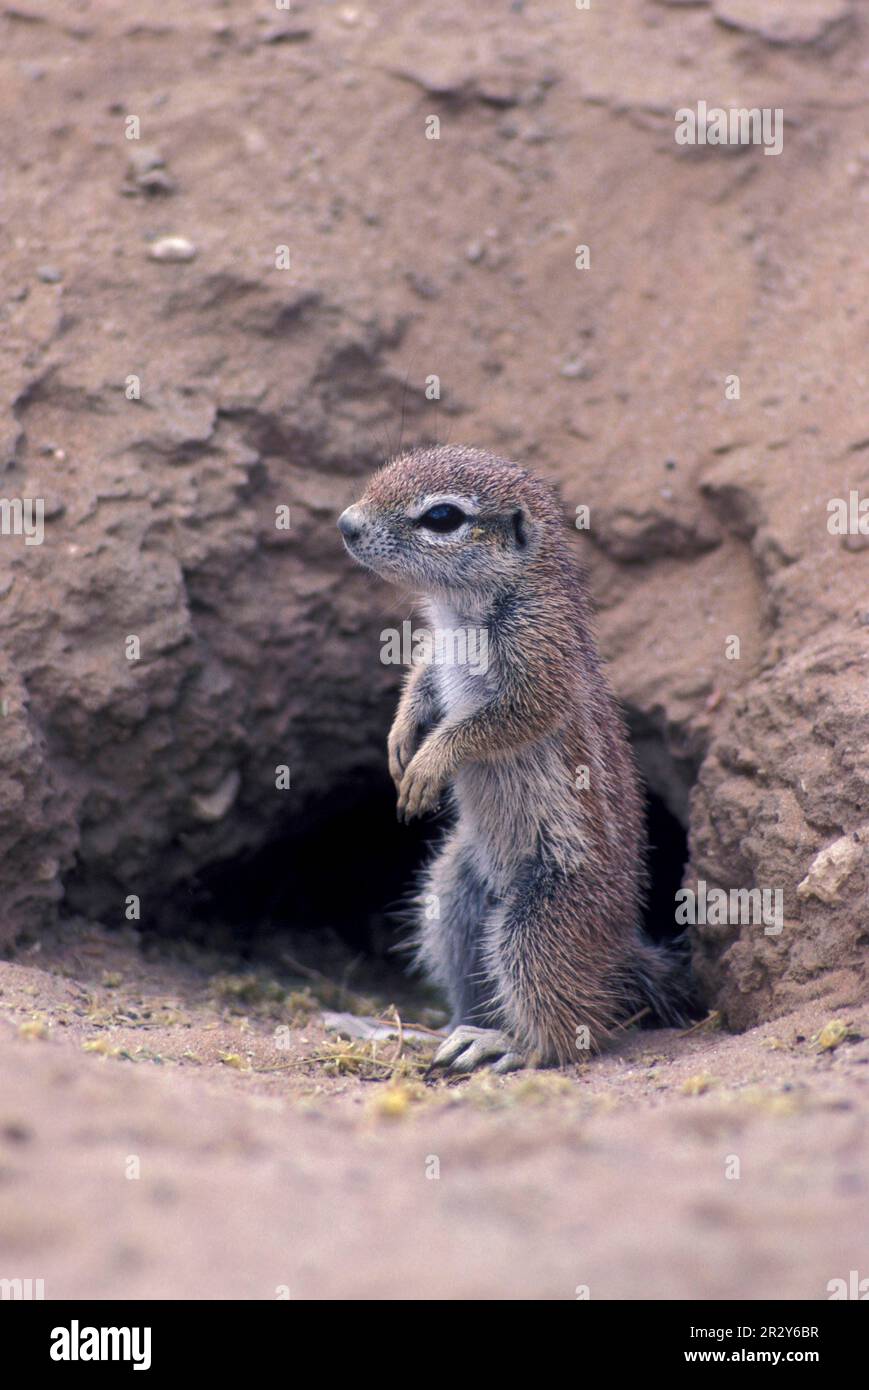 Cape ground squirrel (Xerus inauris), Rodents, Mammals, Animals, Squirrel, Ground Baby standing on hind legs at mouth of burrow. Kalahari Stock Photo